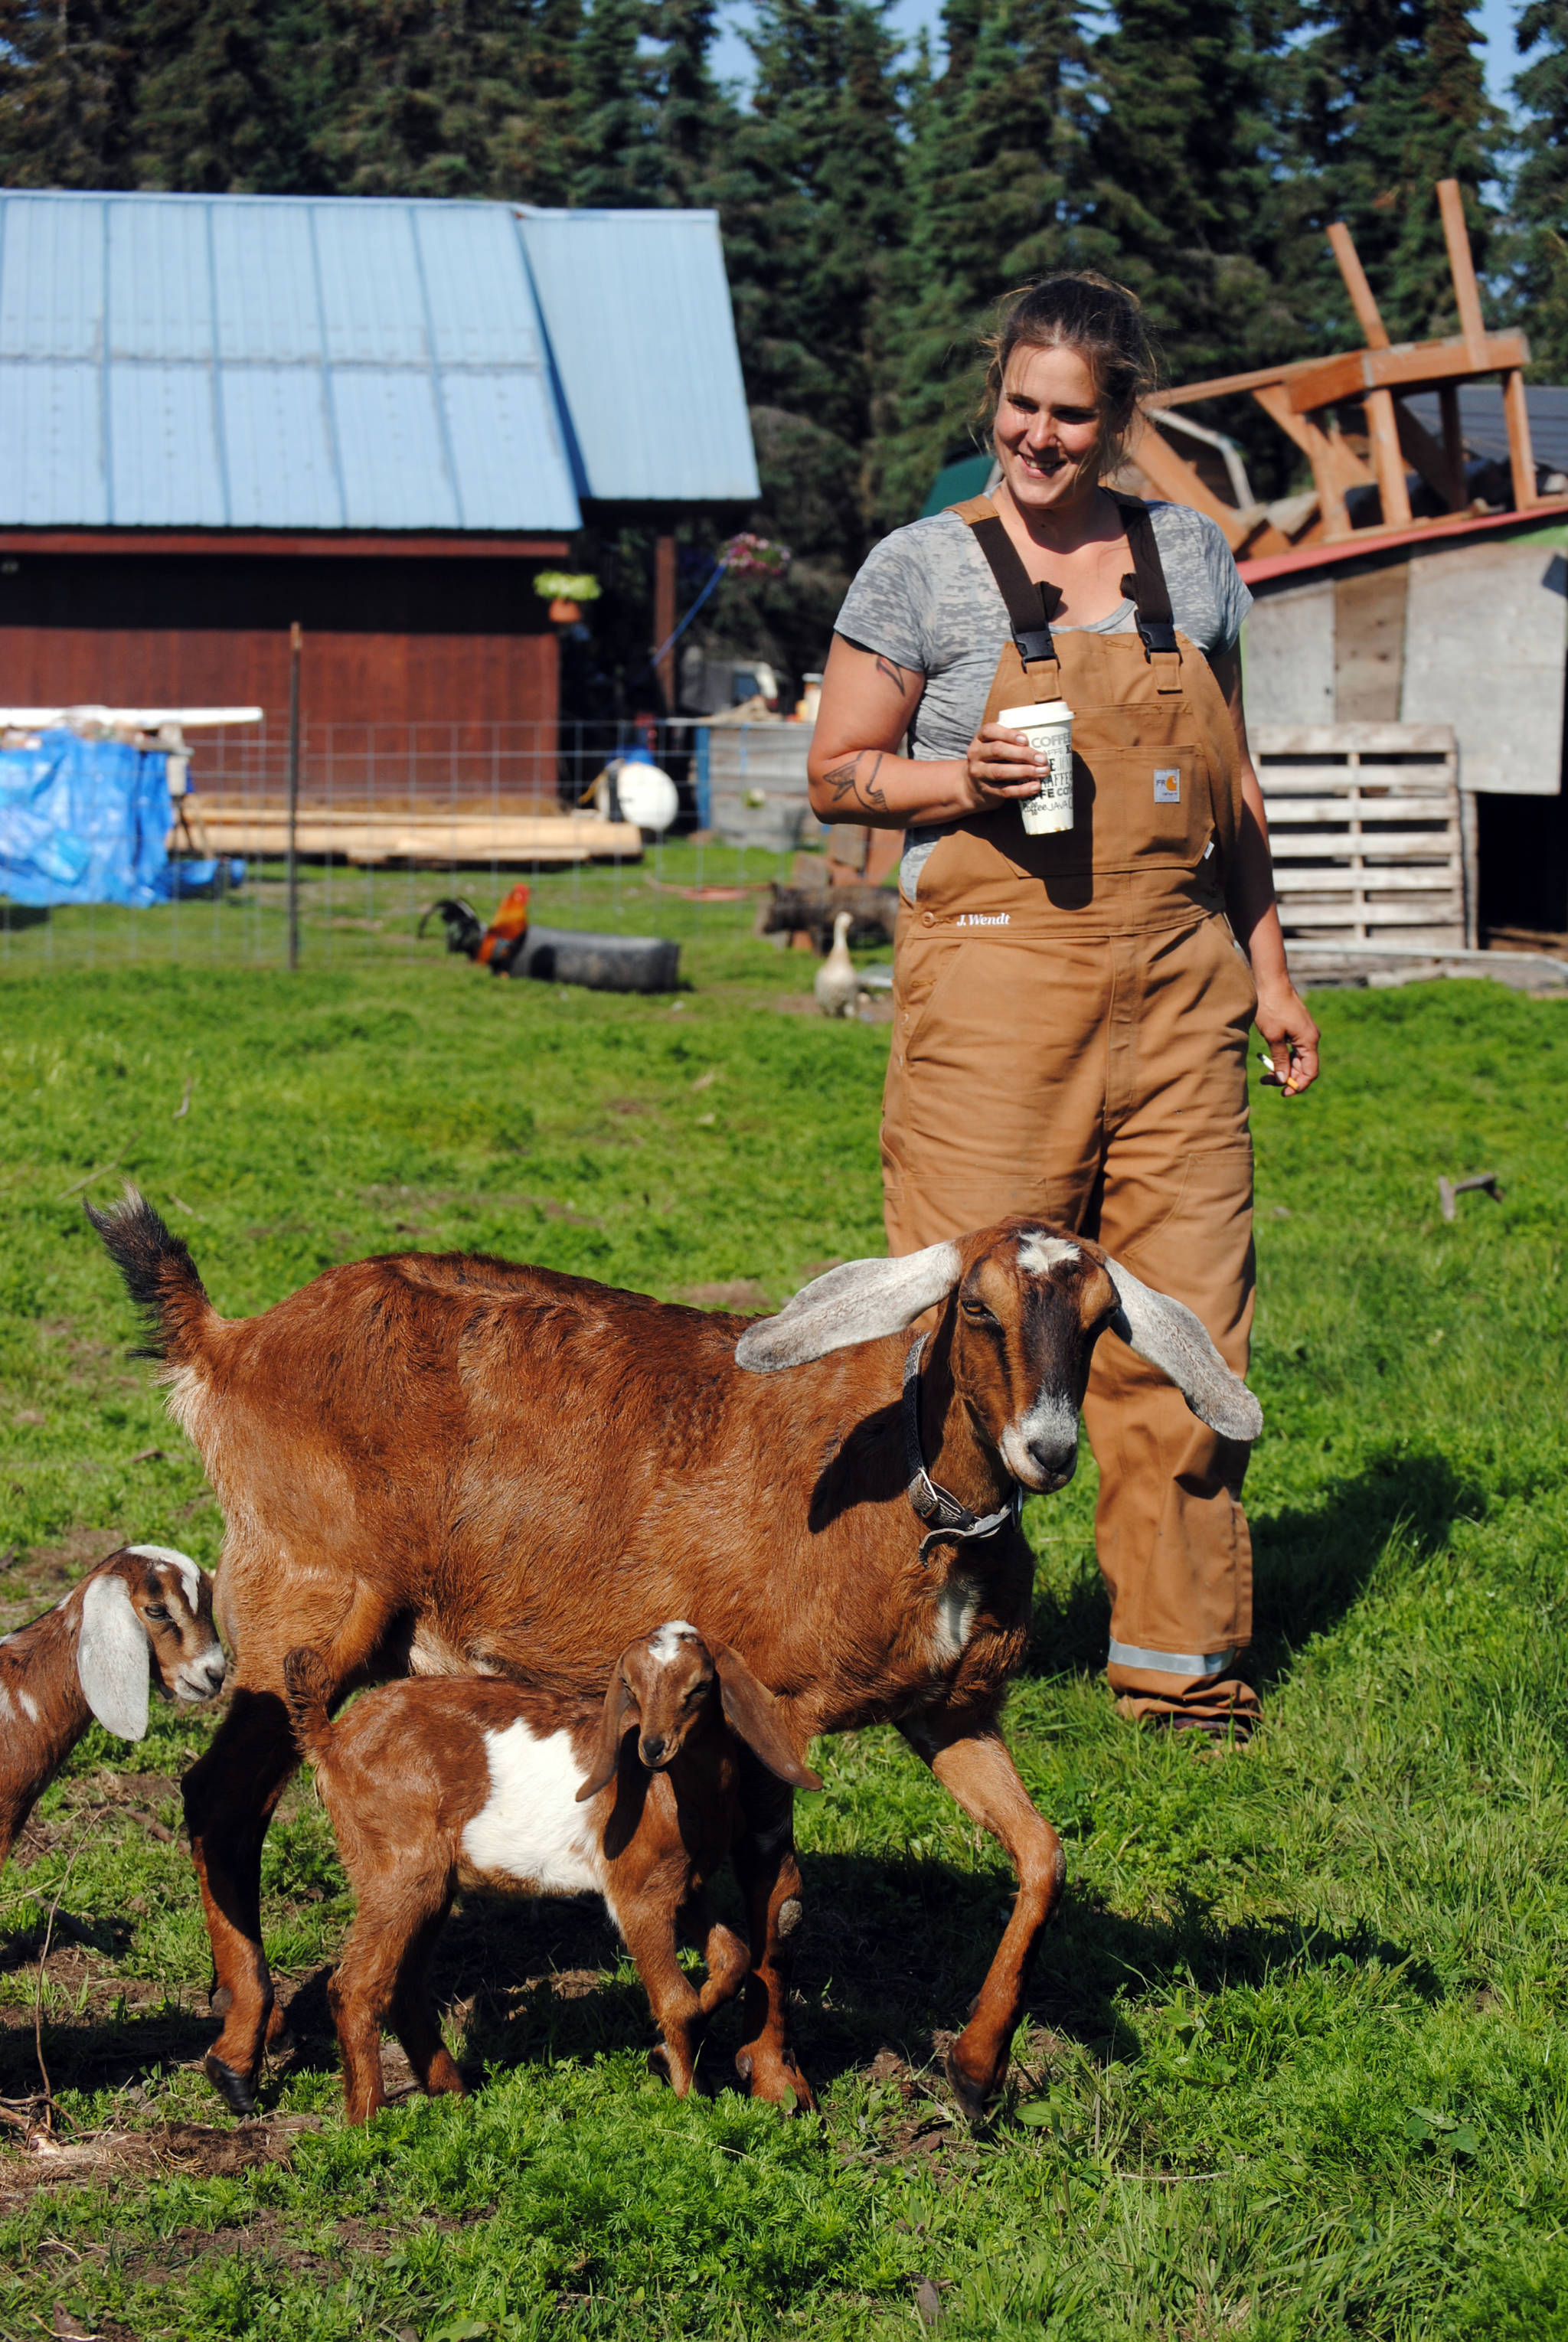 Getting your goat: Karluk Acres farm finds niche